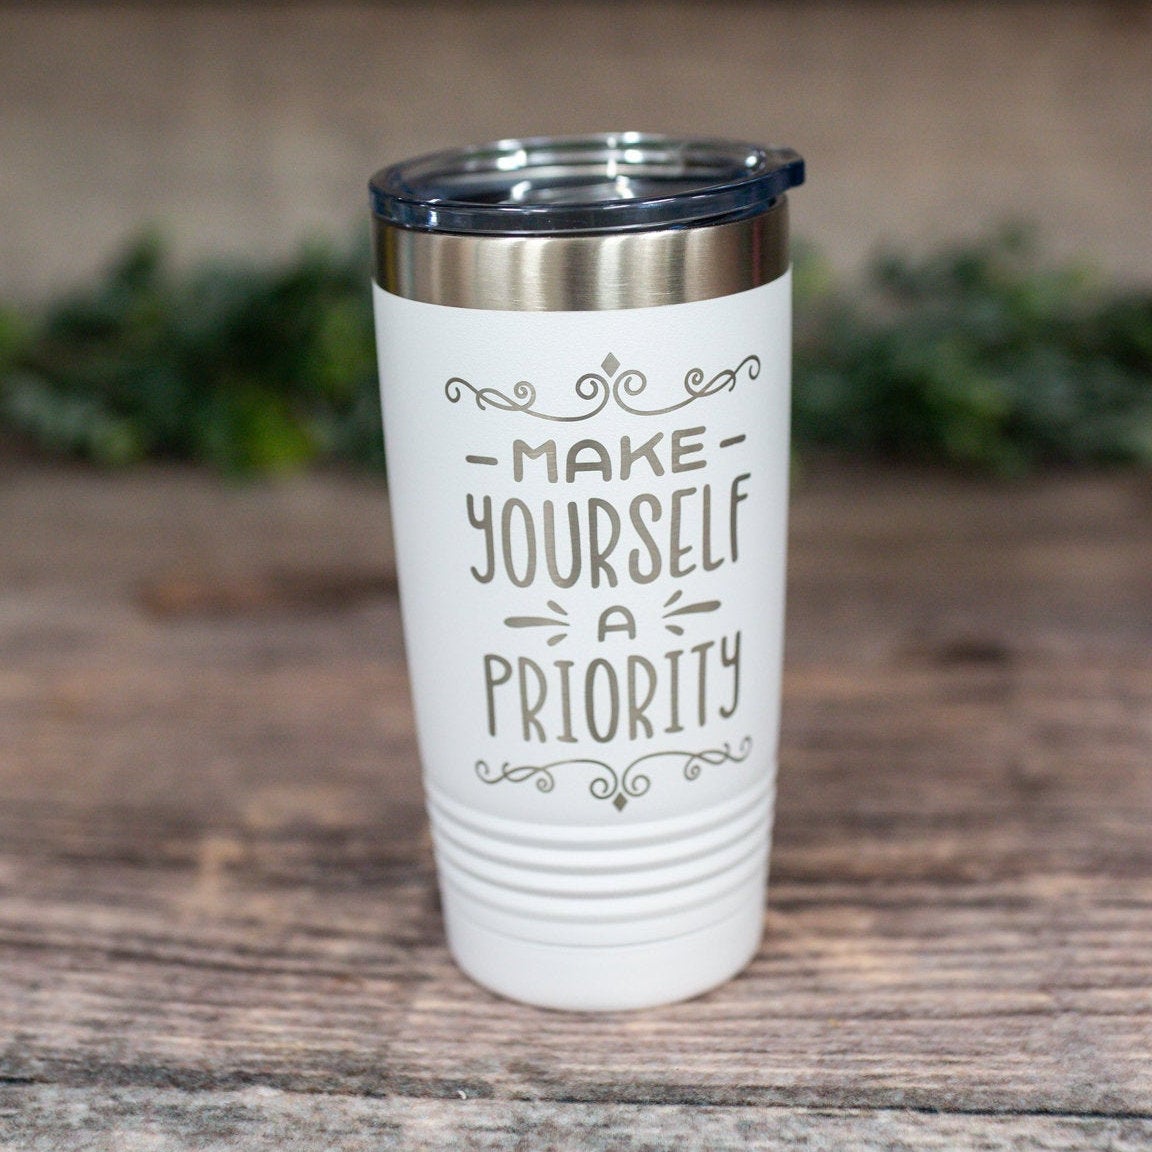 https://3cetching.com/wp-content/uploads/2021/07/make-yourself-a-priority-engraved-stainless-steel-tumbler-personalized-travel-mug-motivational-gift-mug-60f71d76.jpg